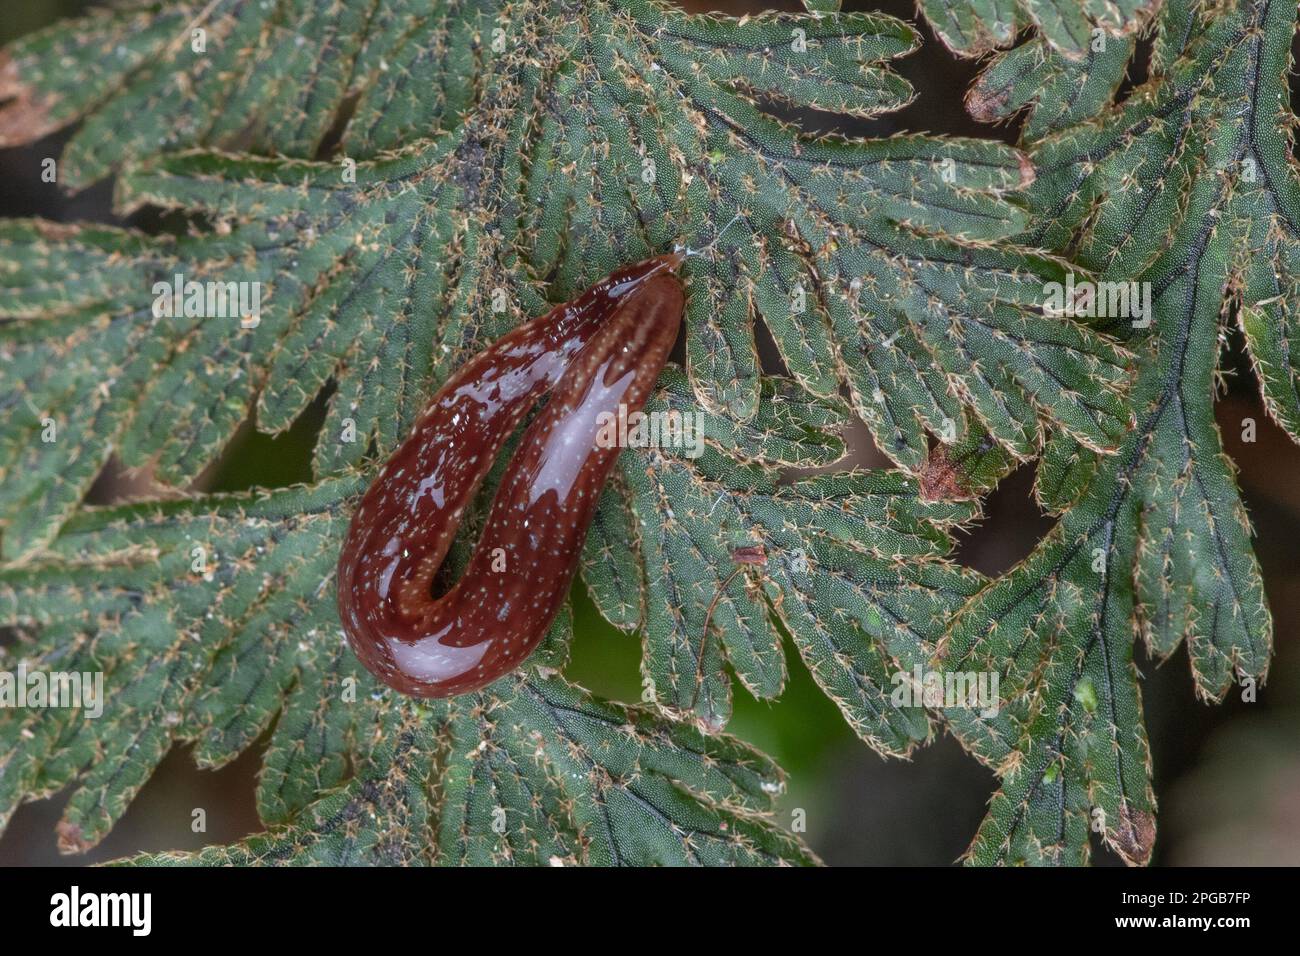 A terrestrial flatworm or land planarian(Newzelandia sp) from the forest of Fiordland National Park in Aotearoa New Zealand. Stock Photo